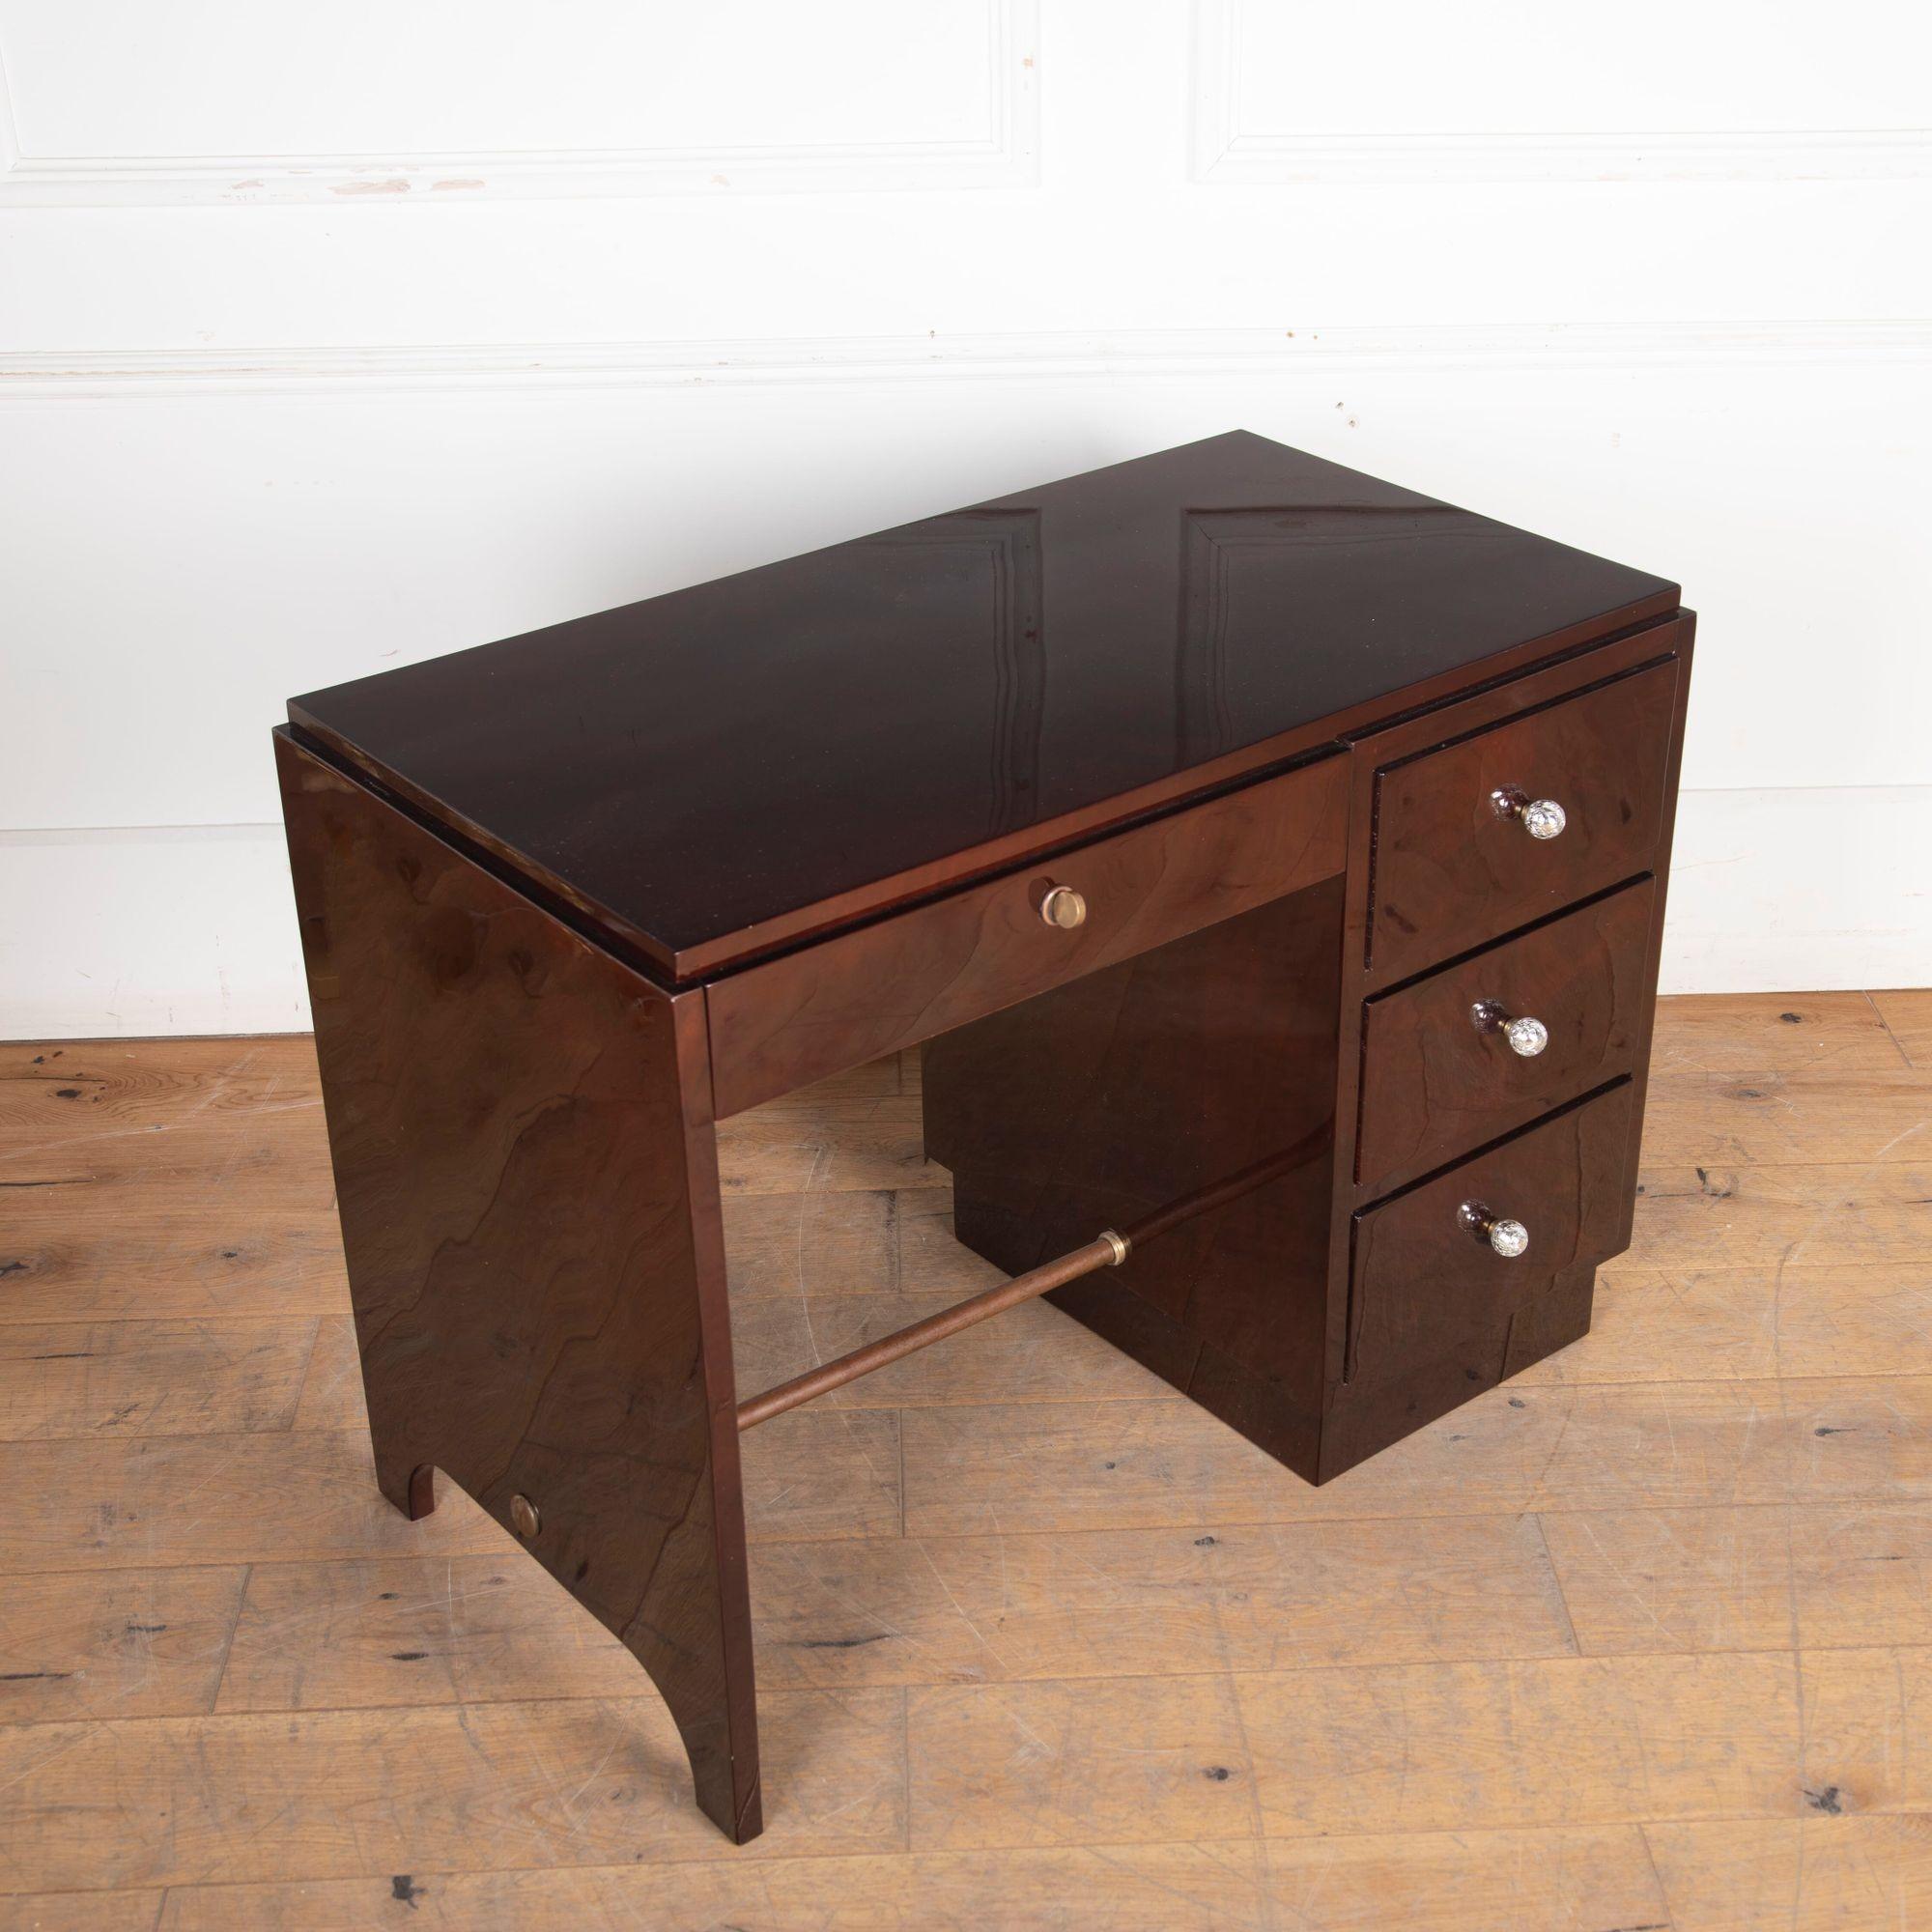 Charming French Art Deco ladies writing desk. 
This desk is covered with walnut veneer that is in a palisander colour.
It has three chests on the right side and one in the center. The whole is decorated with three new stylish handles.